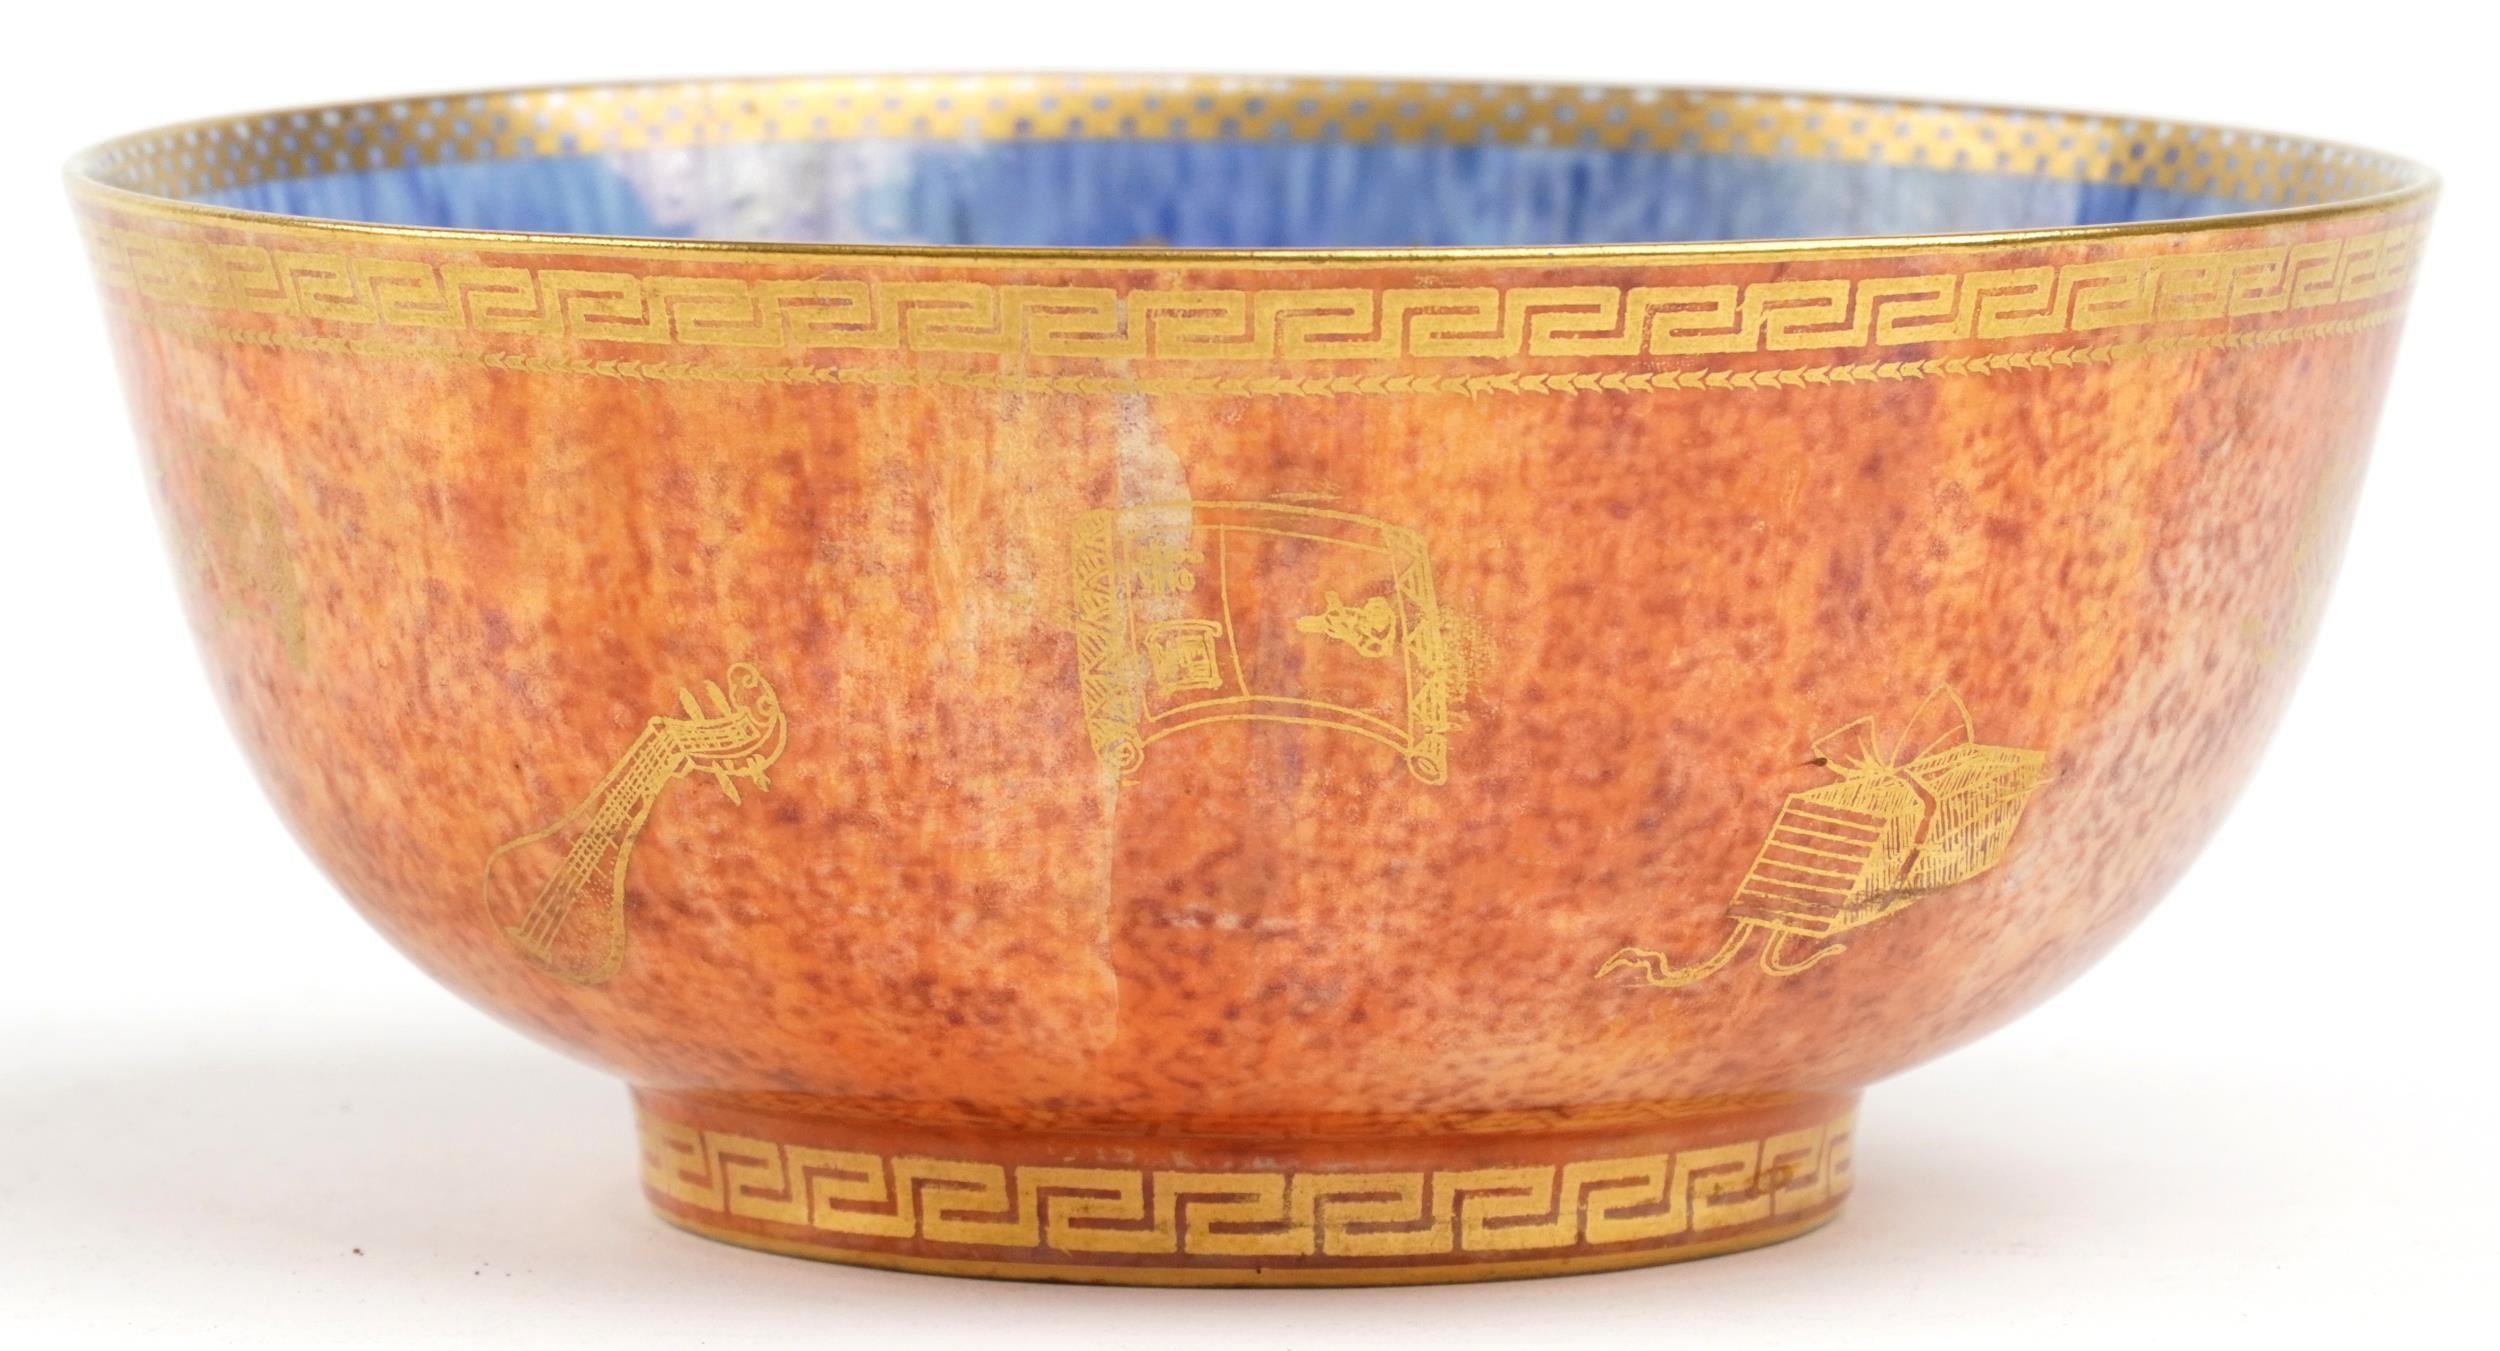 Wedgwood orange and blue ground Fairyland lustre bowl gilded with dragons chasing the flaming - Image 2 of 7